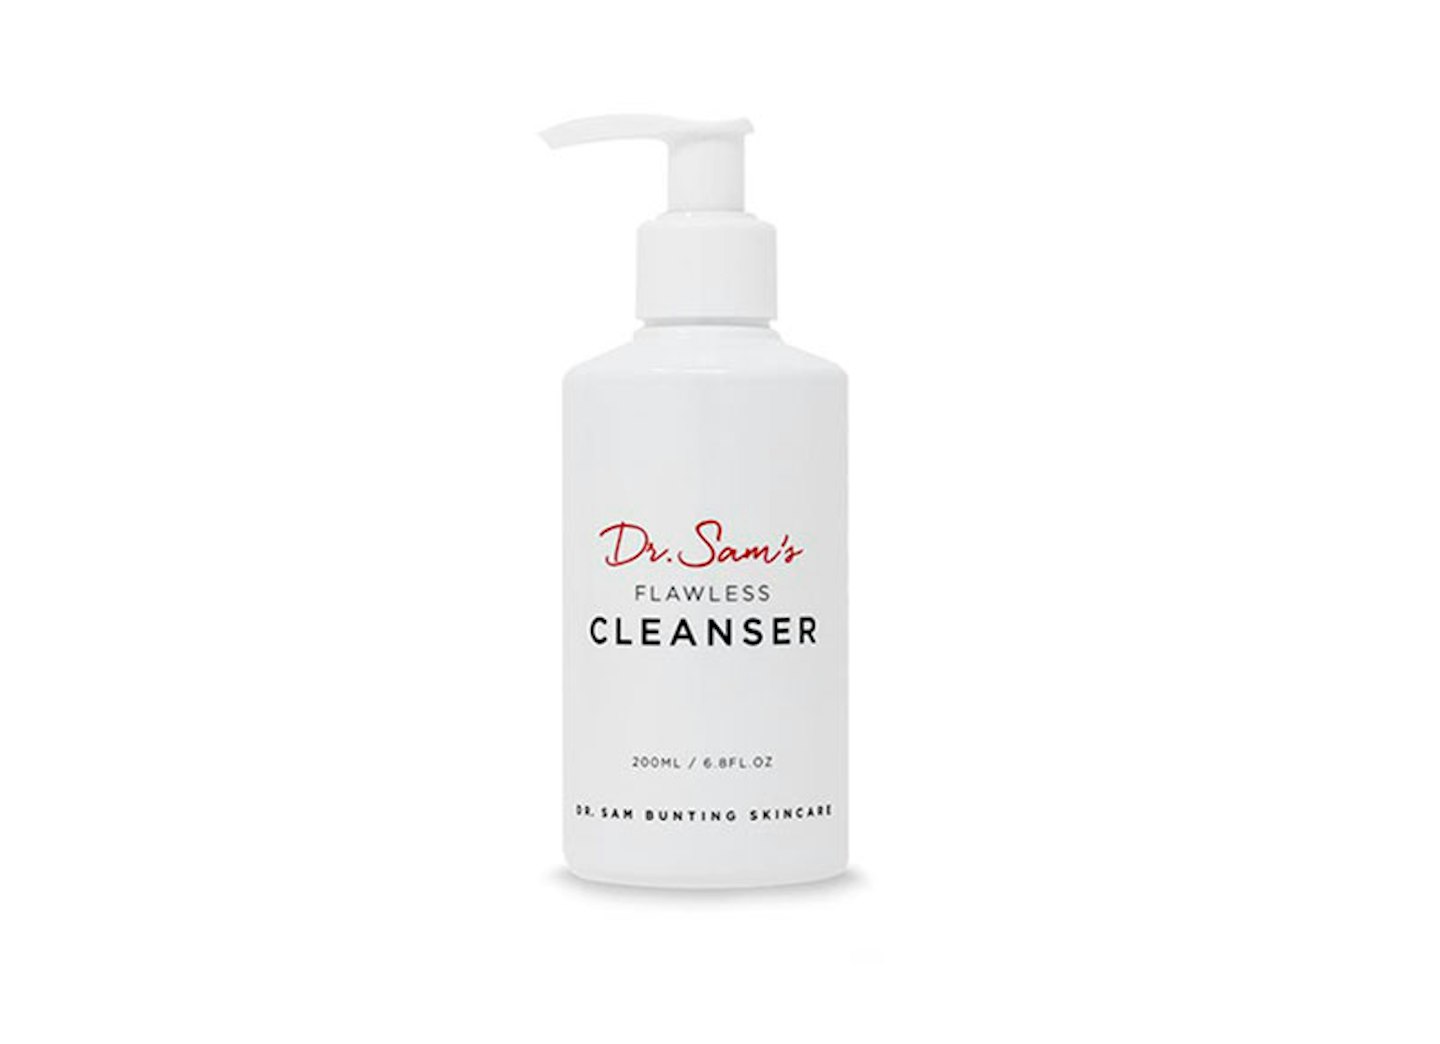 Dr Sam Bunting Flawless Cleanser, £16